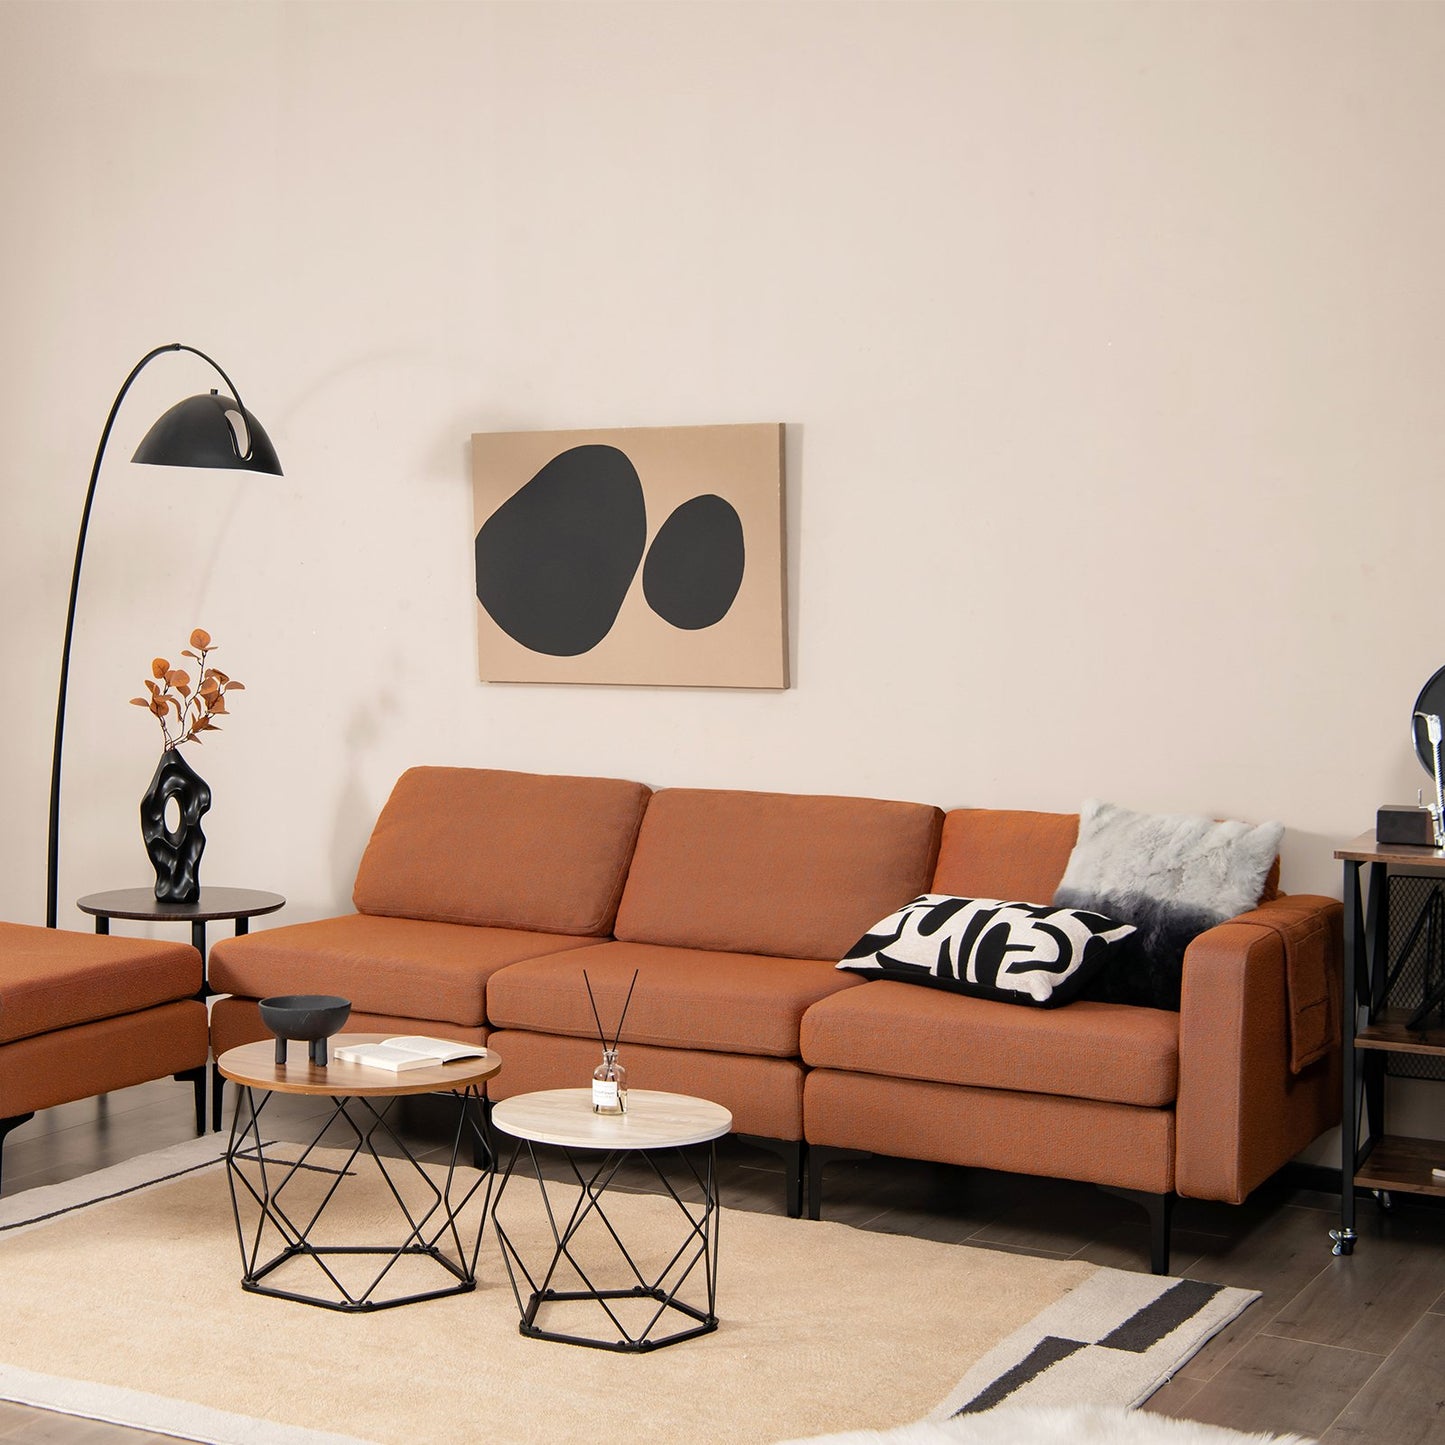 Modular L-shaped Sectional Sofa with Reversible Chaise and 2 USB Ports, Orange at Gallery Canada